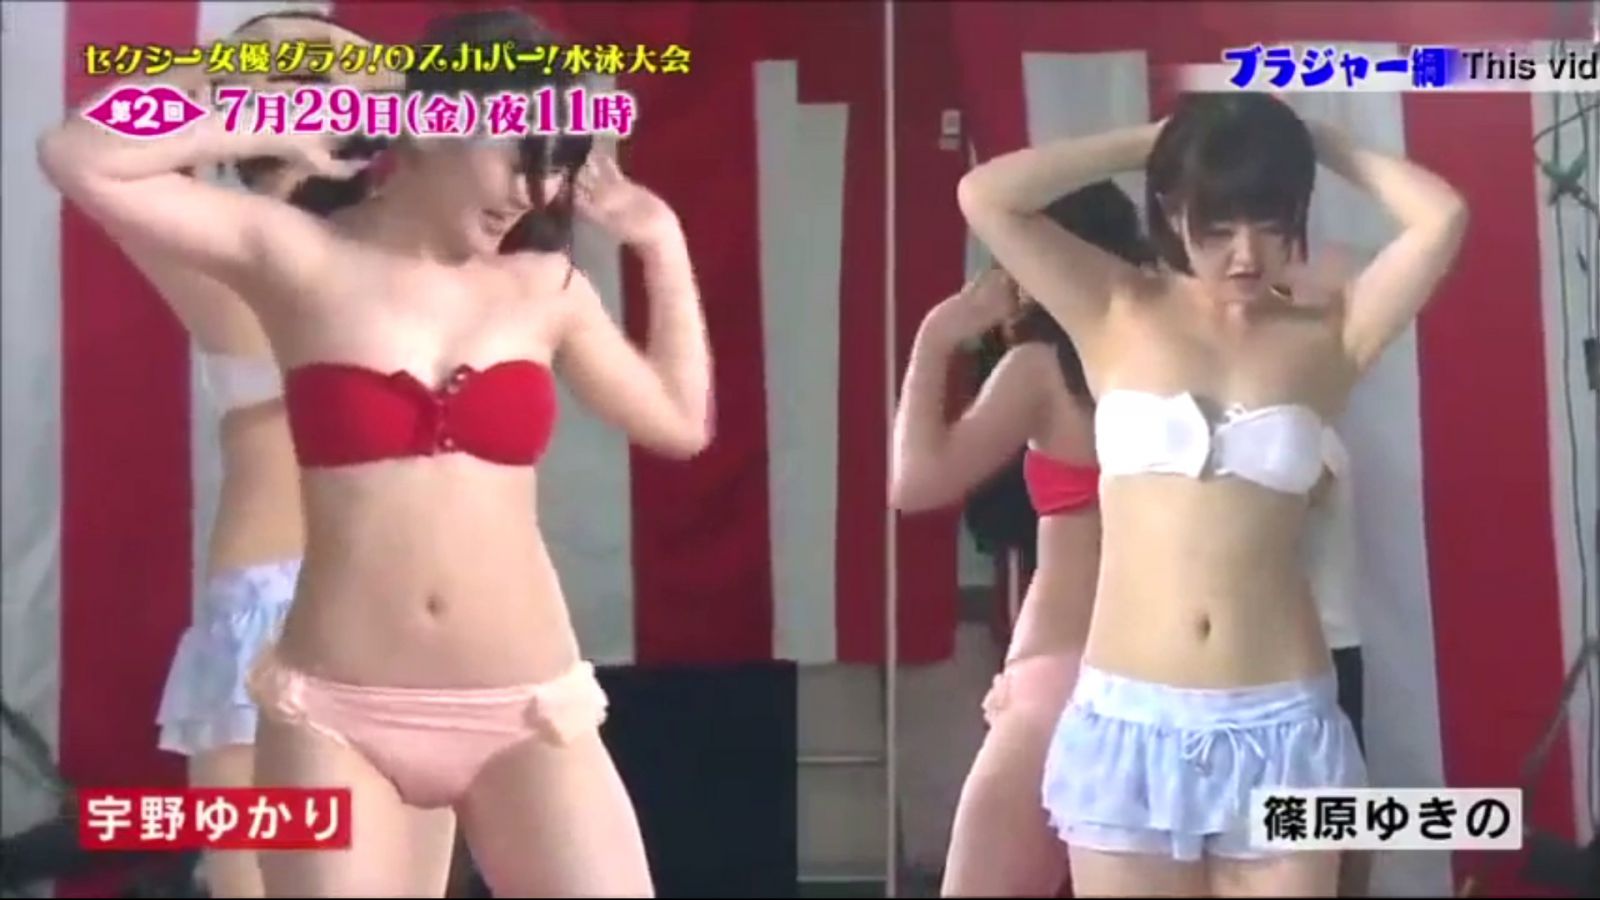 Video Japanese Game Show Adult Erotic Nude Sensual Fucking, Fucking game show Japanese, Japanese soccer fucking game show, Fucking game show Nhật Bản, Fucking Game Show Japanese, Nude game show Japanese, Game show nude Japan, Japanese TV game show, Japanese TV Game Show 18 Lixisua Hot Sexy